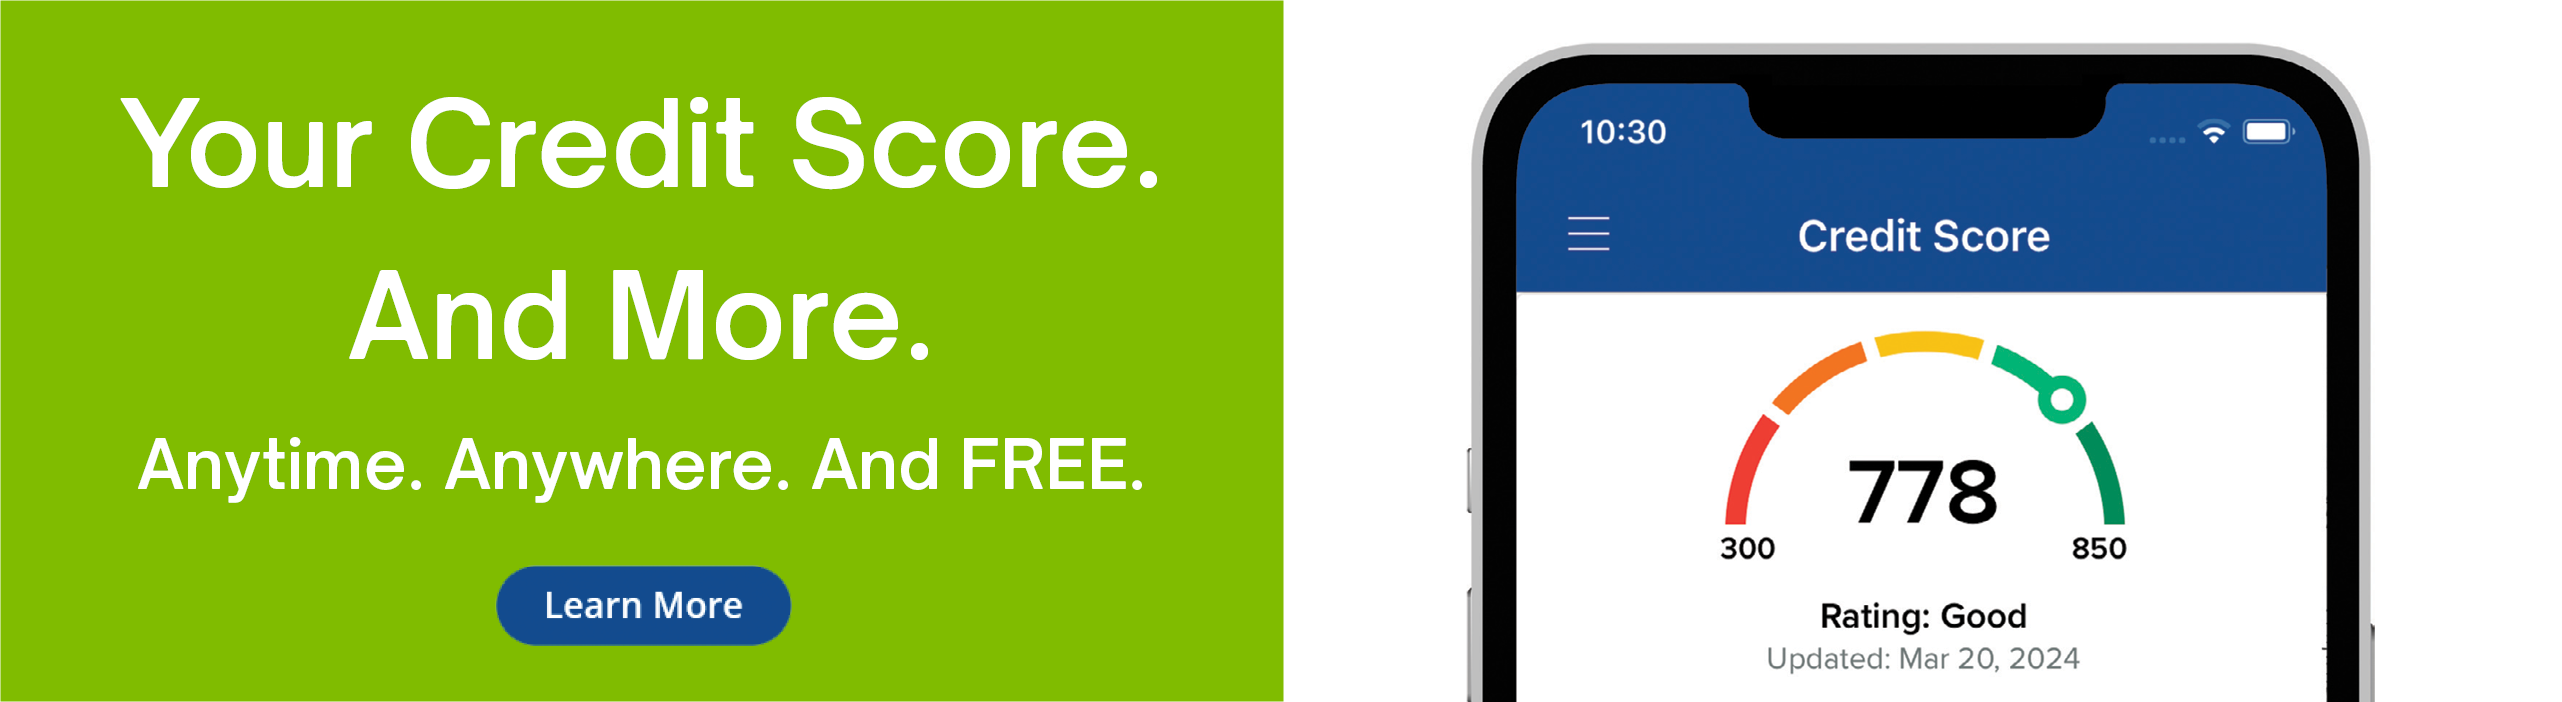 Your credit score. And more.
Anytime. Anywhere. And FREE.
Learn More